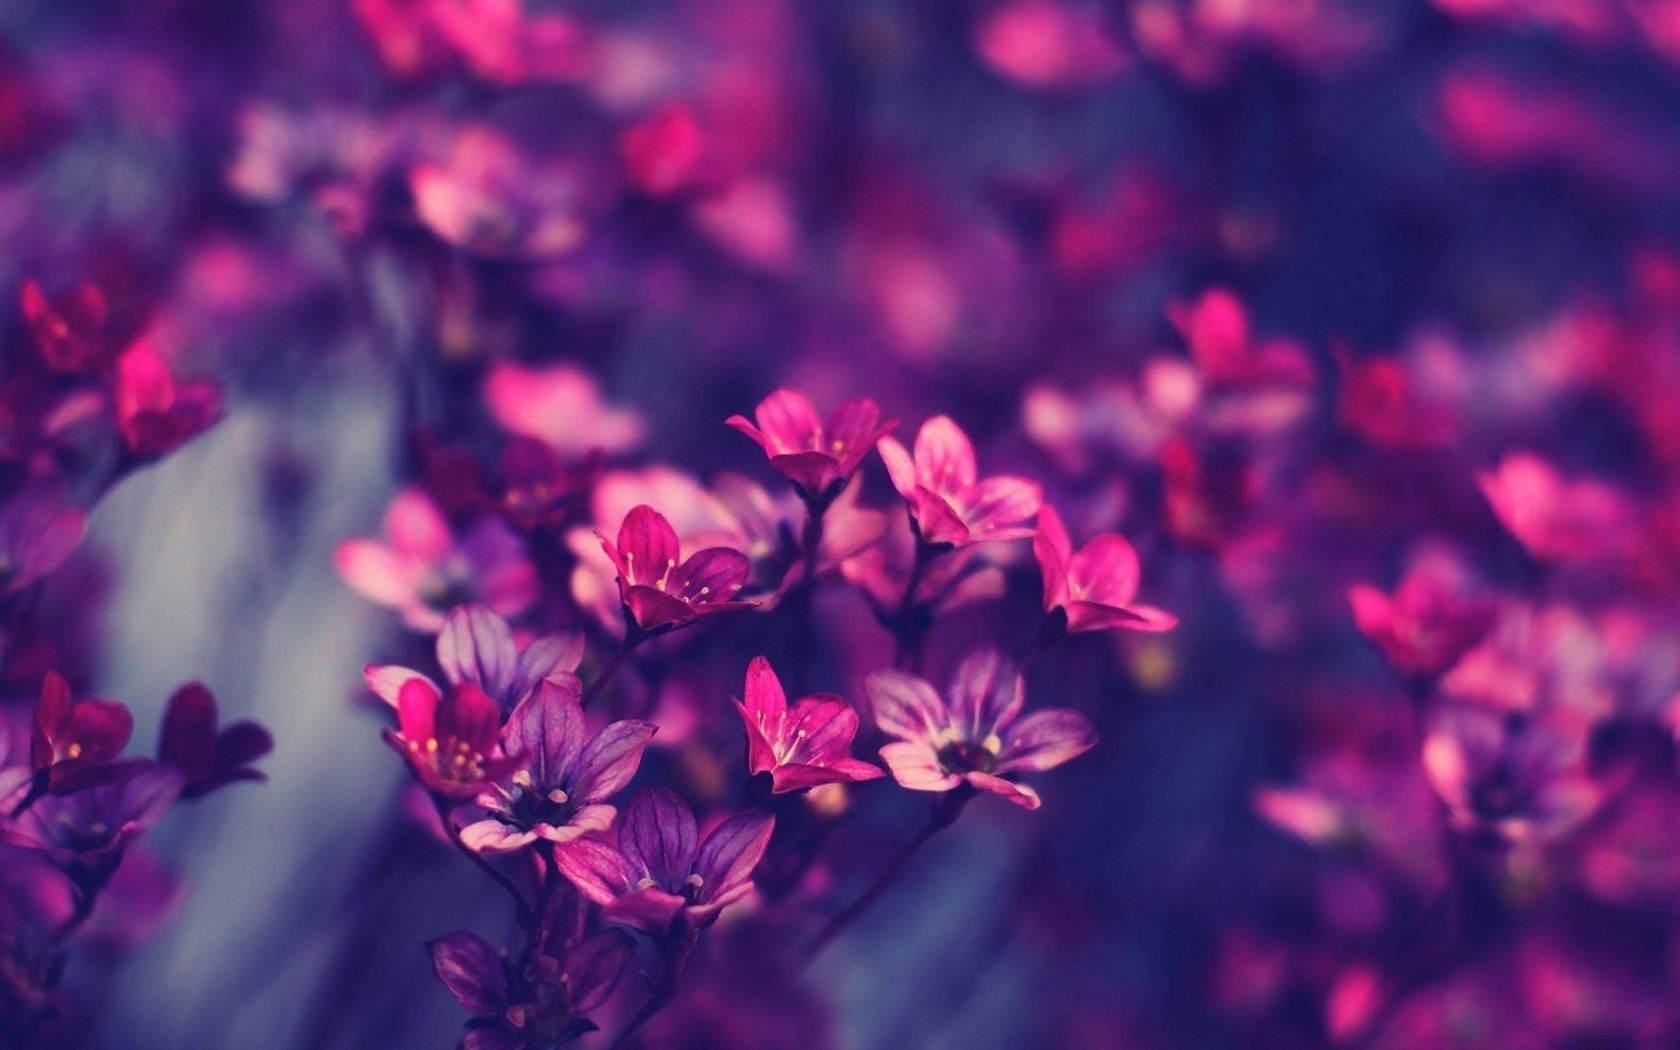 Wallpaper Red Little Flowers Close Up, Blurry Background 1920x1080 Full HD 2K Picture, Image